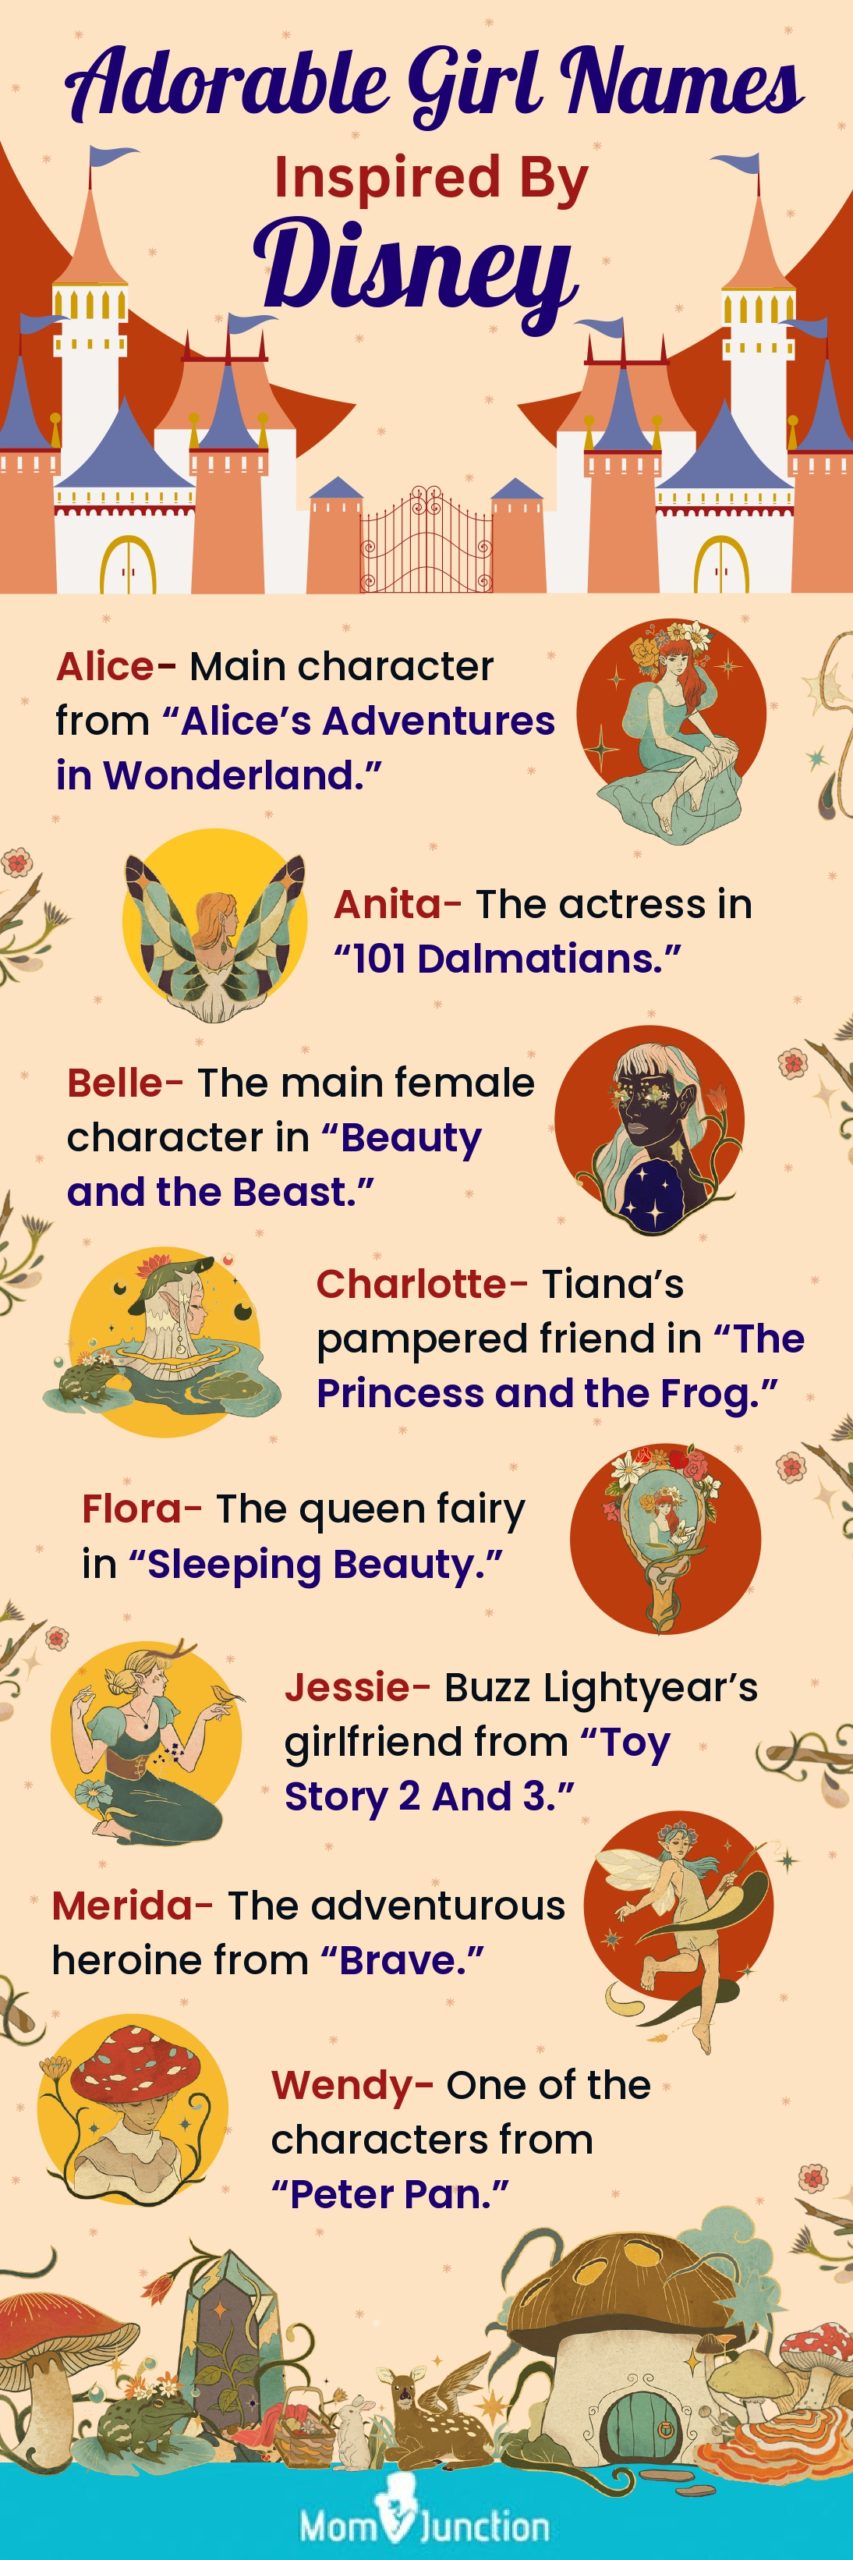 adorable girl names inspired by disney (infographic)